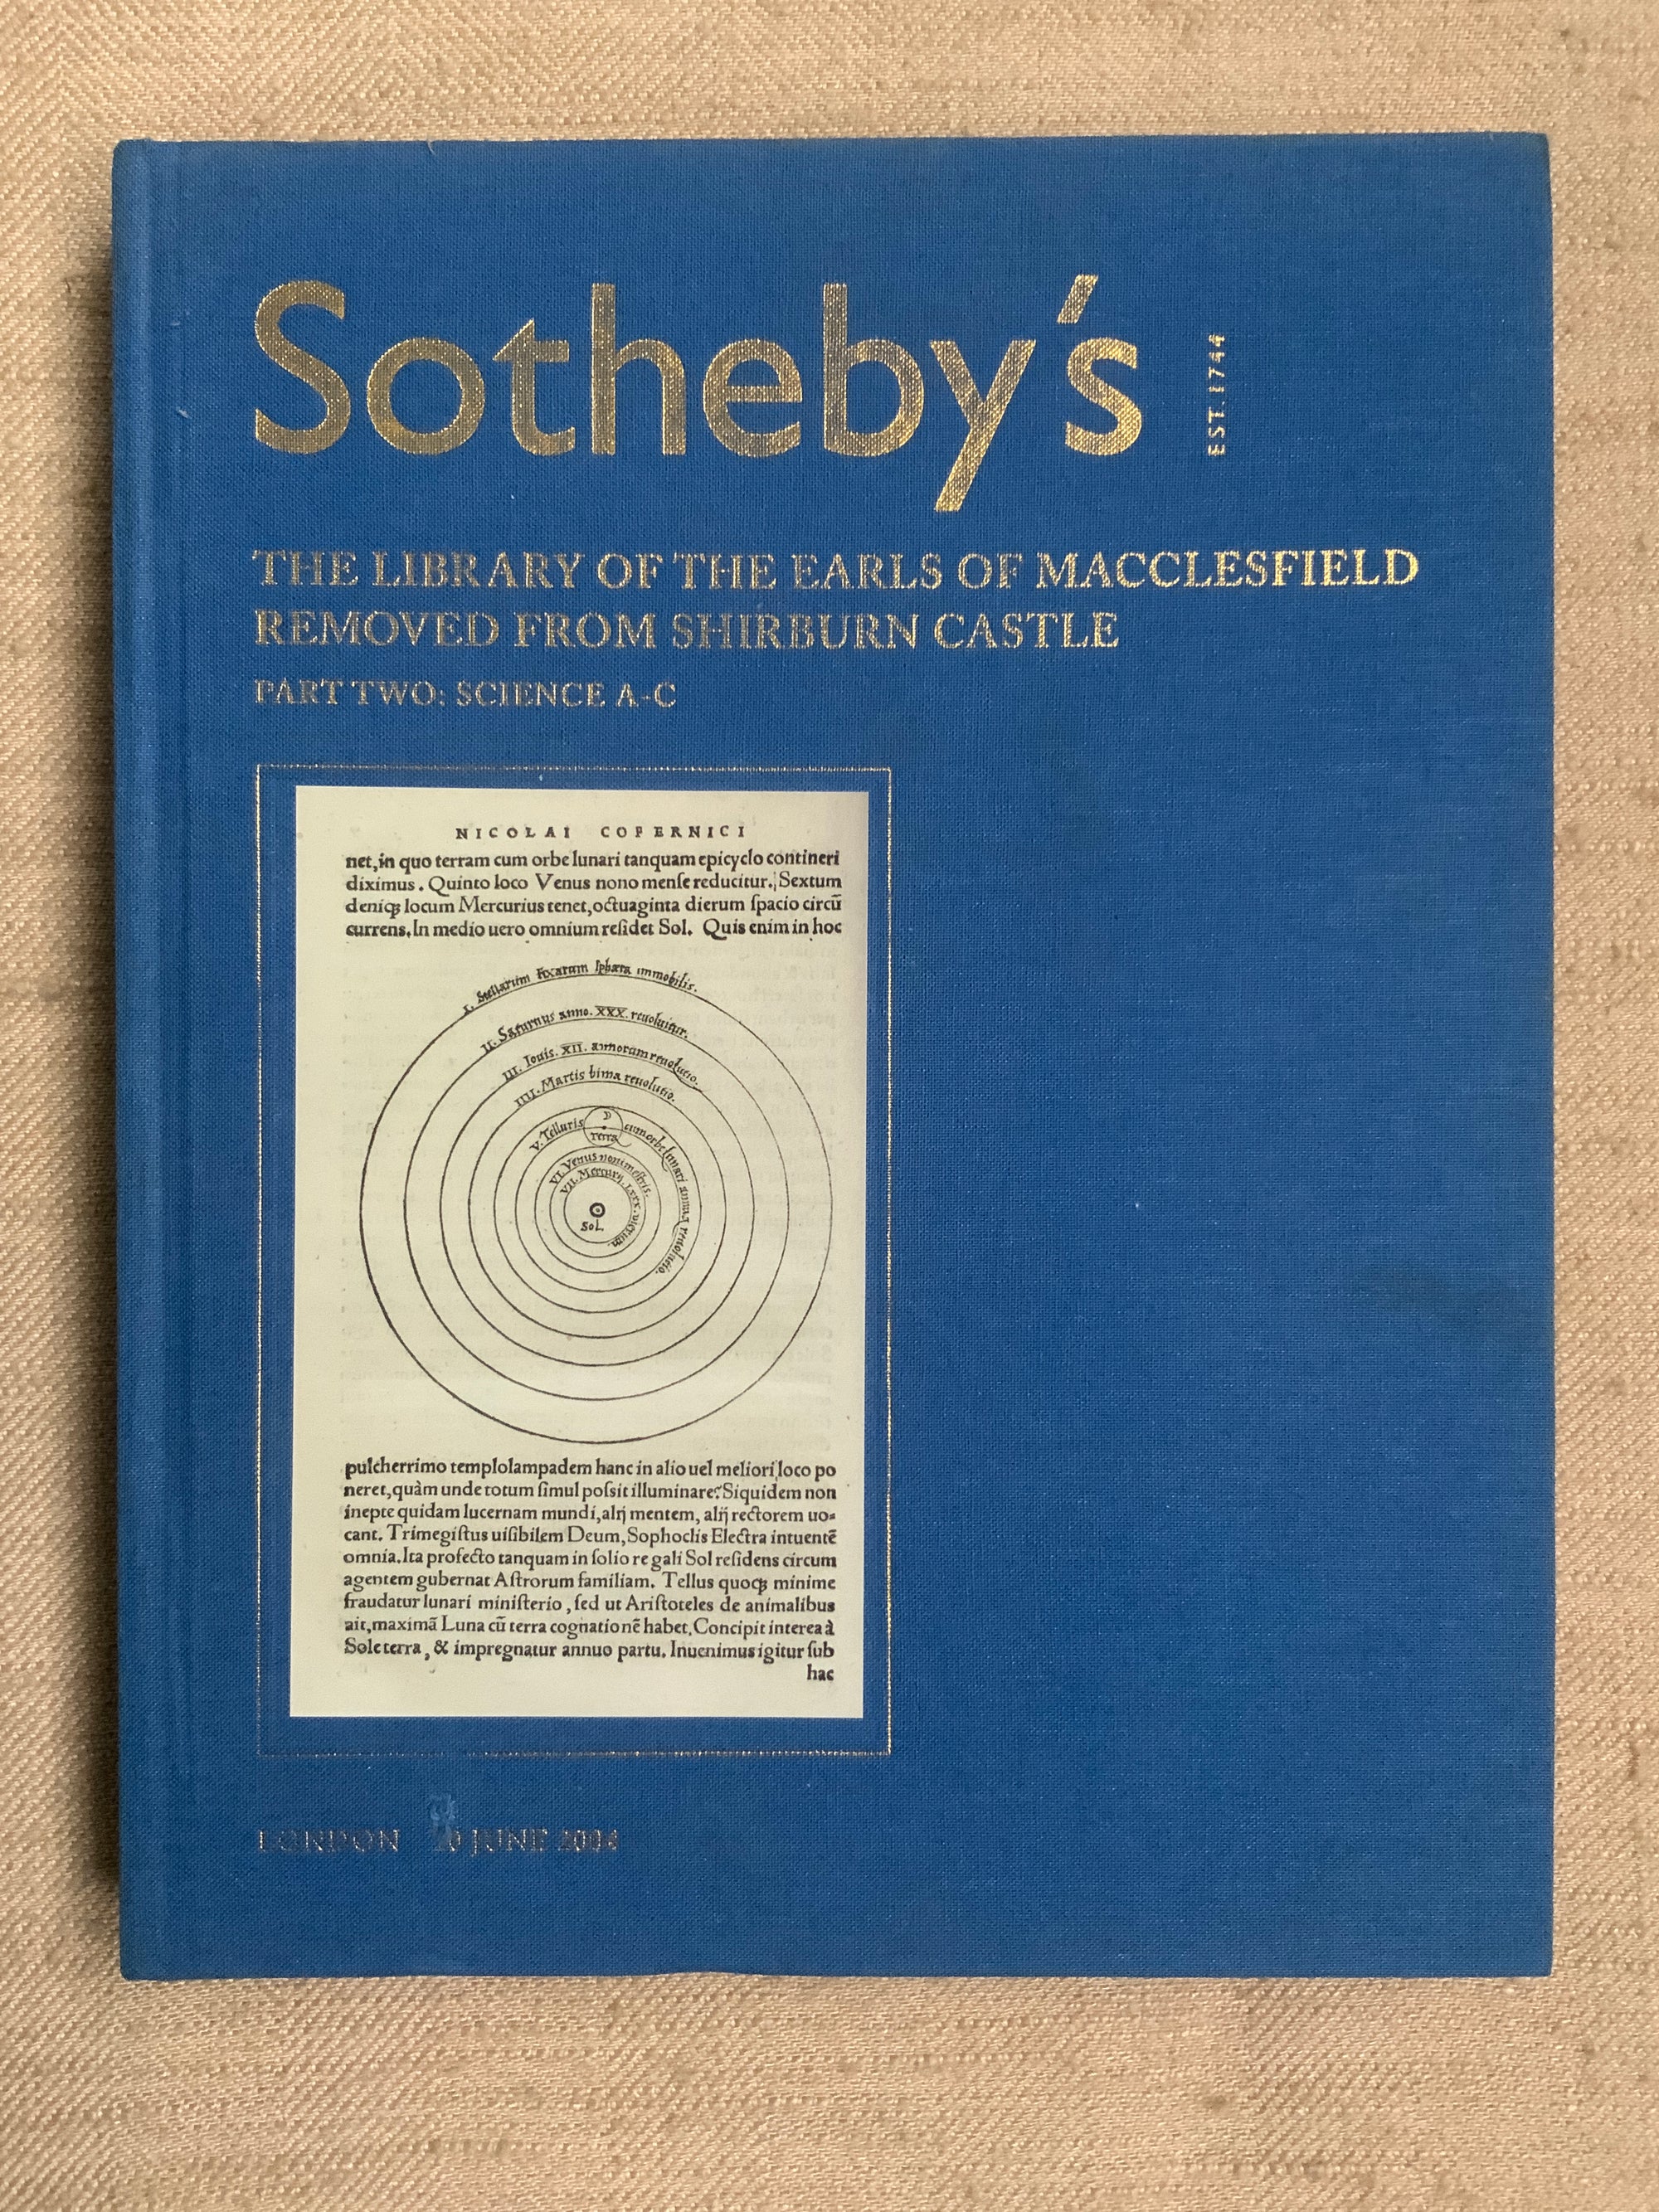 Sotheby's London • Macclesfield Library • Part Two: Science A-C